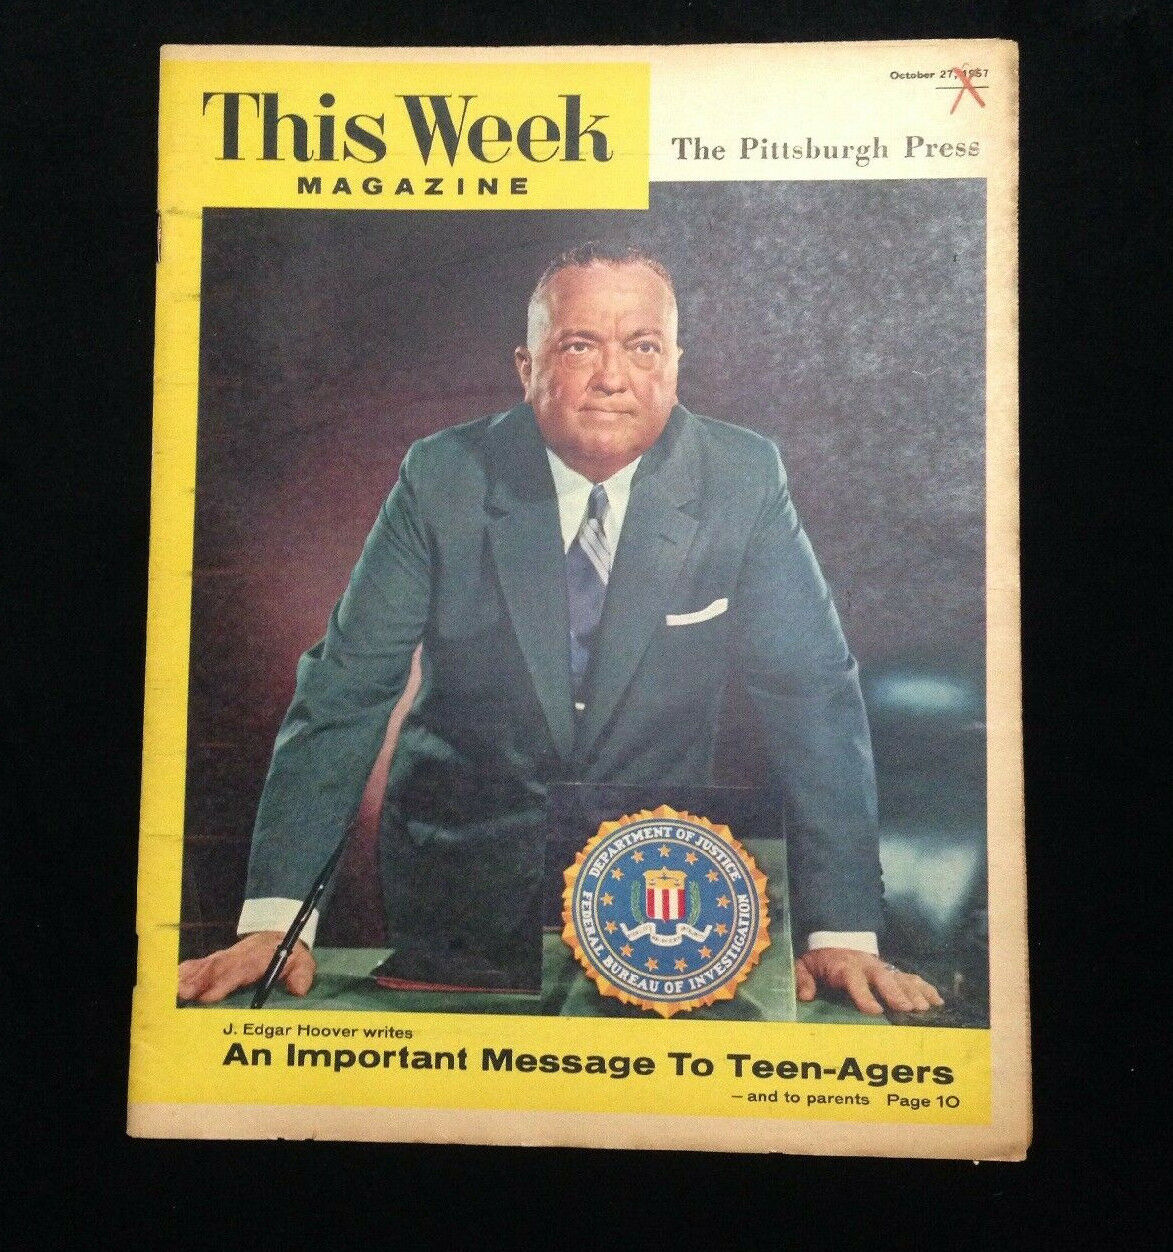 THIS WEEK Magazine - October 27, 1957 - J Edgar Hoover An Important Message....